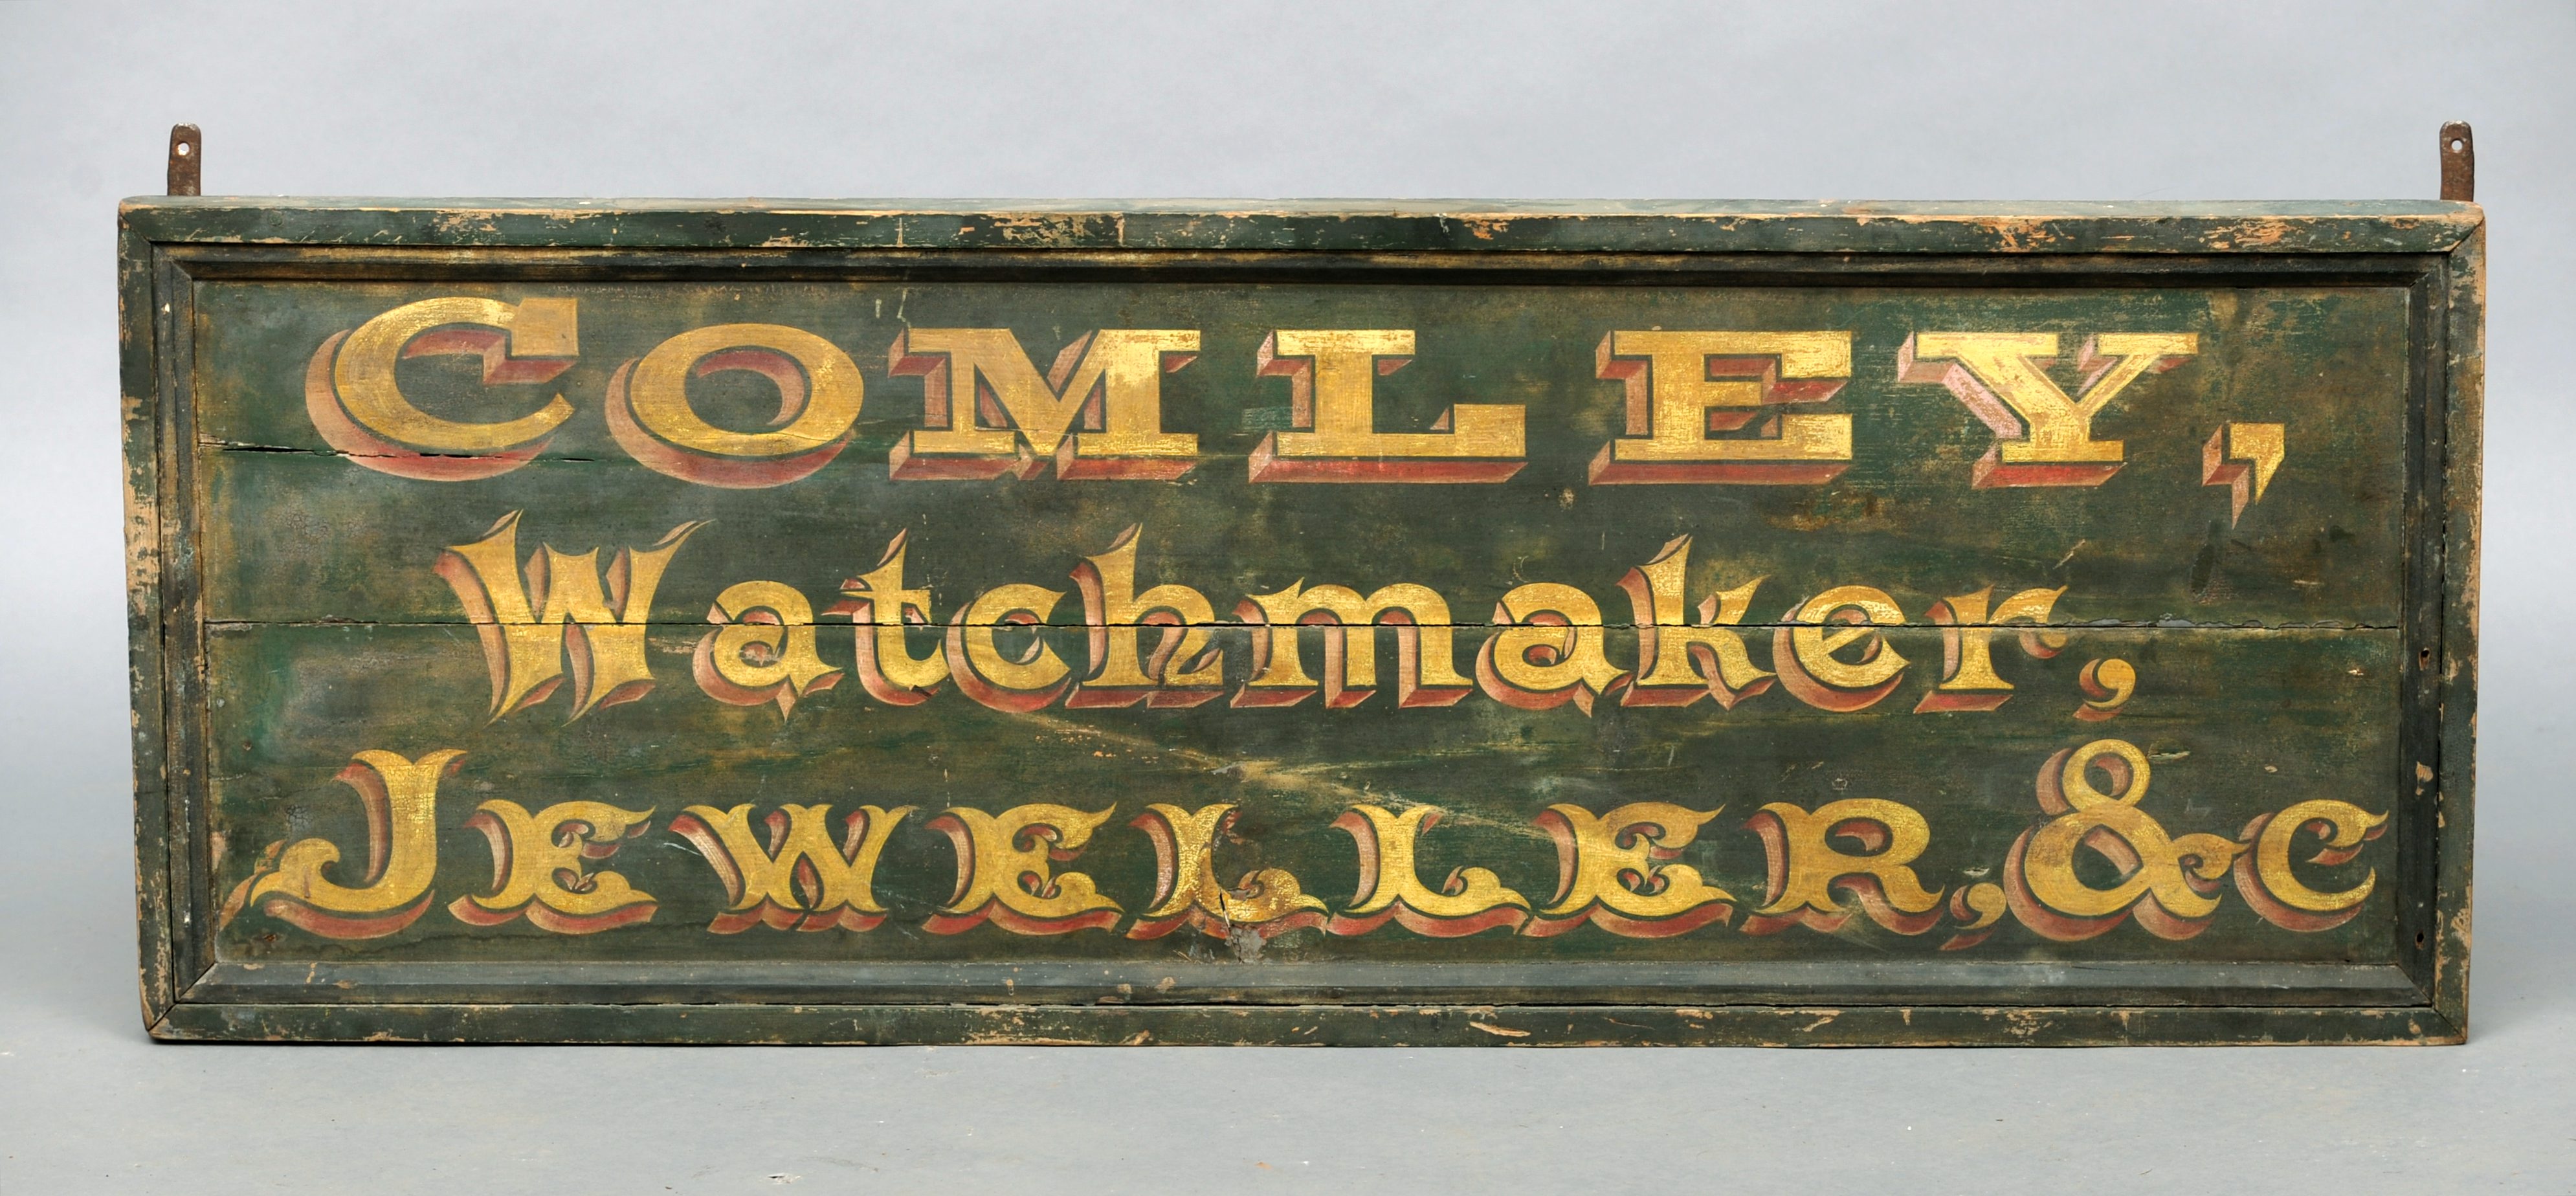 A 19th century painted wood watchmaker’s sign Inscribed Comley, Watchmaker, Jeweller & C, on a green